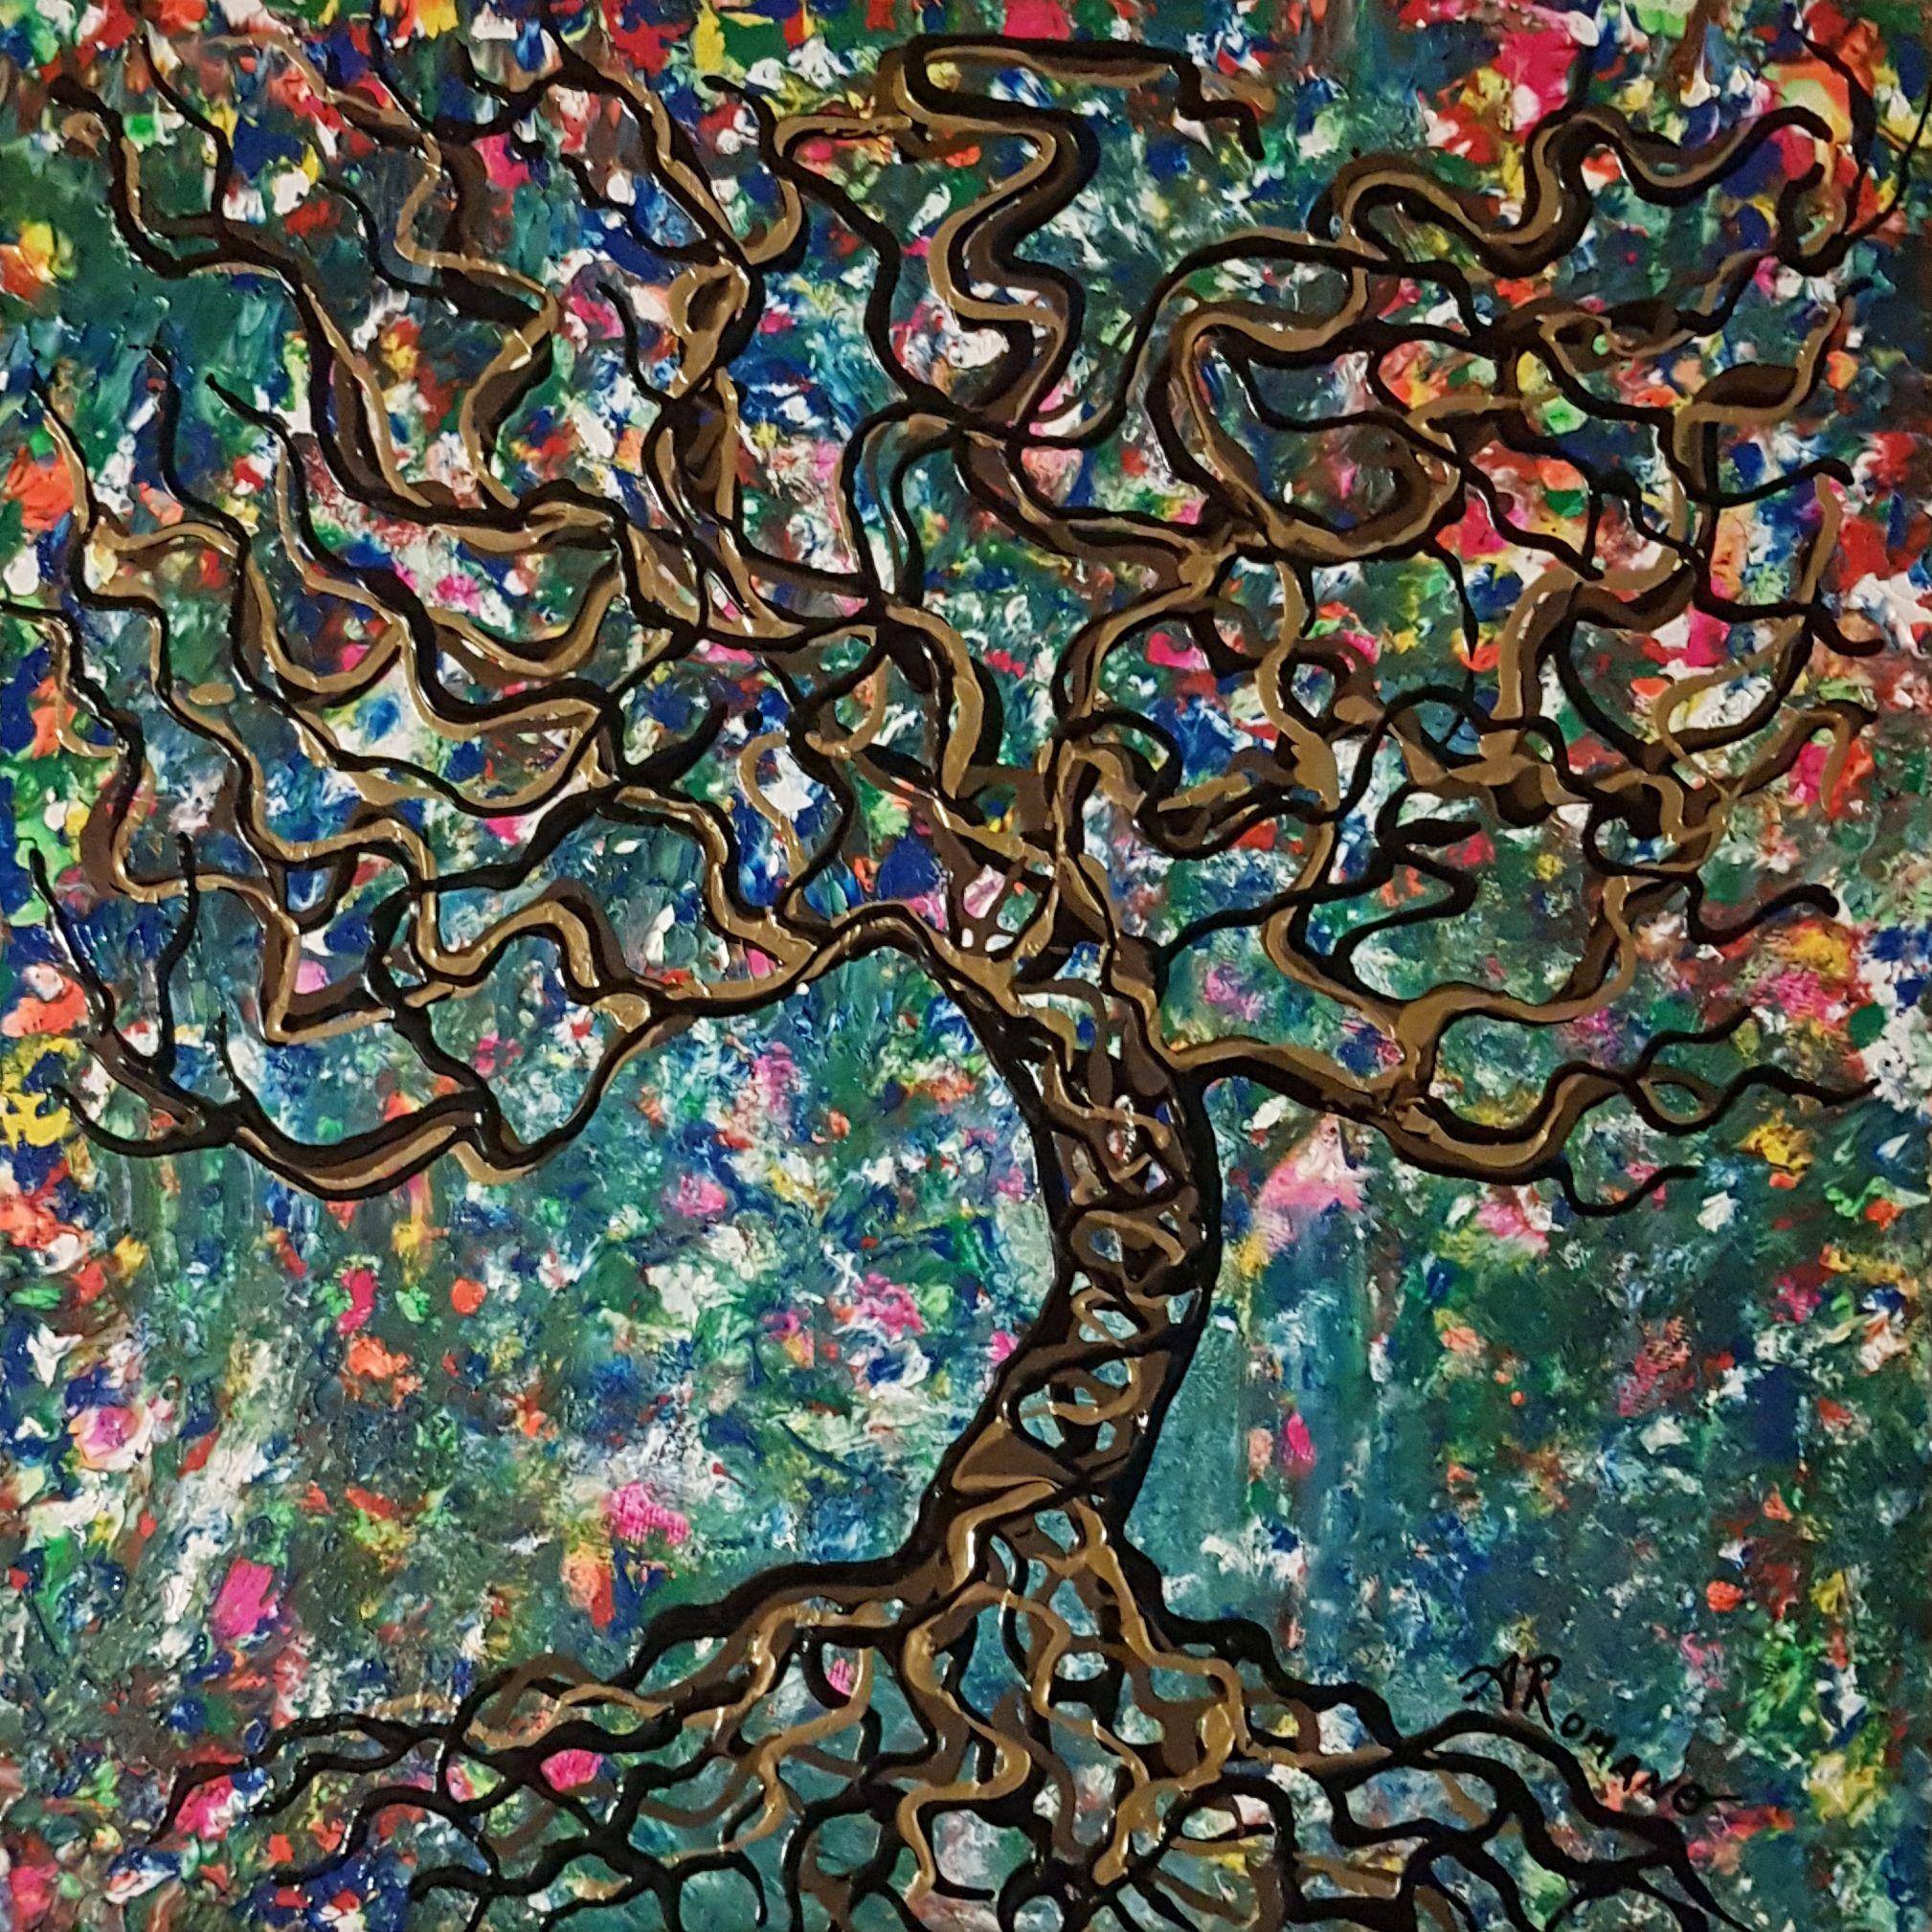 "Roots" is a unique piece with textured whimsical tree branches created over an expressive abstract background consisting of dark green and blue paint and vibrant accents colours. The tree trunk, roots, and branches pop out from the surface